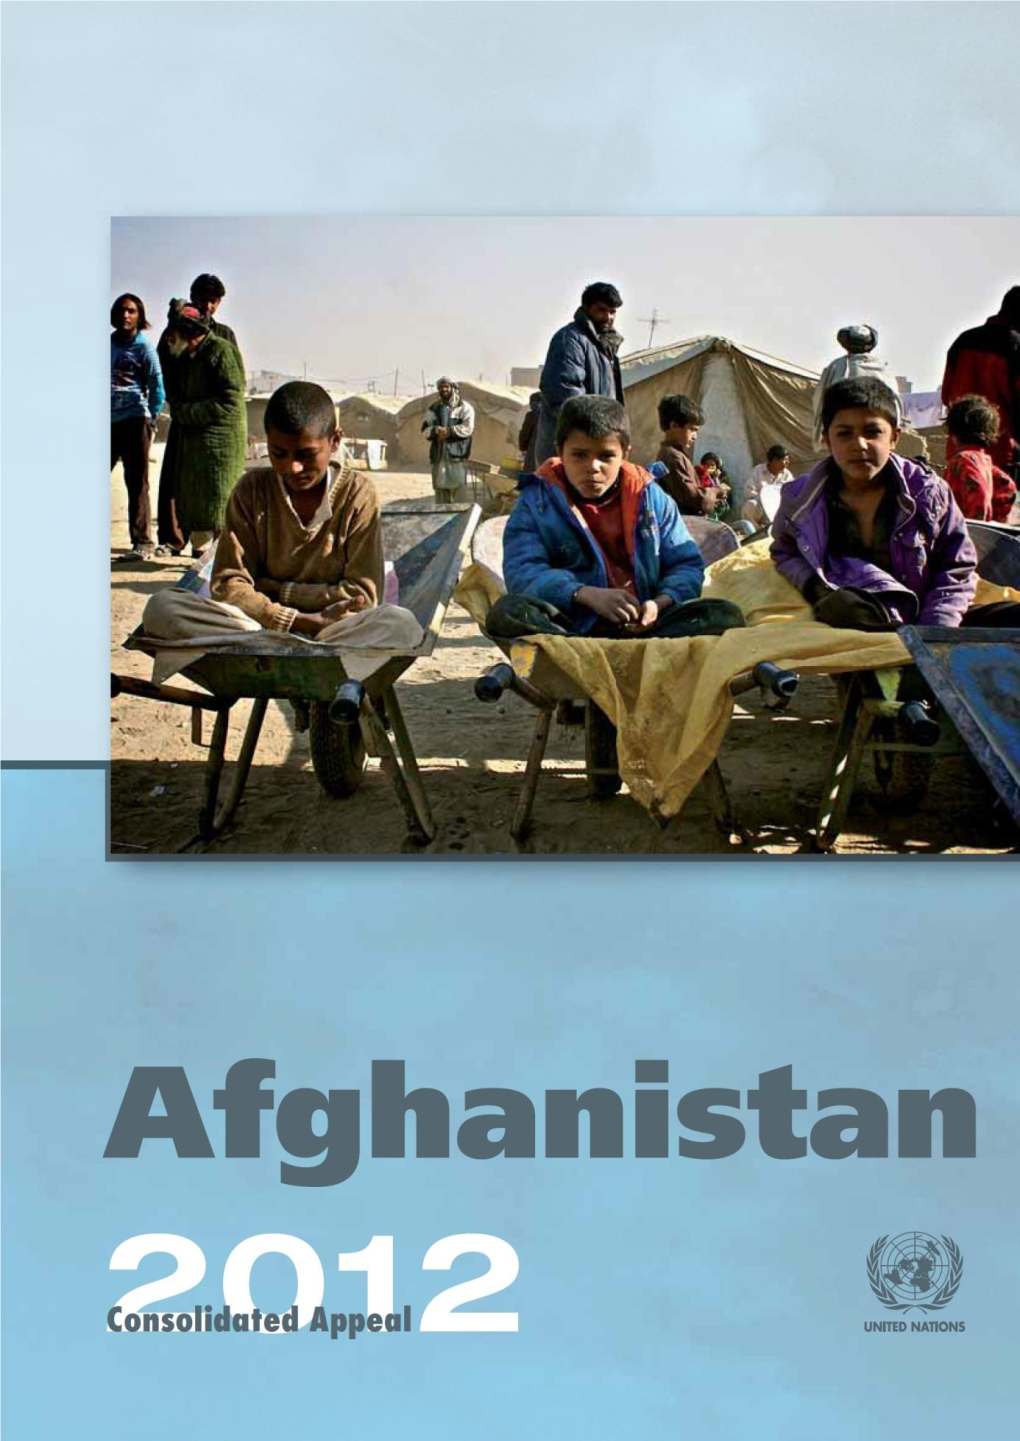 2012 Consolidated Appeal for Afghanistan